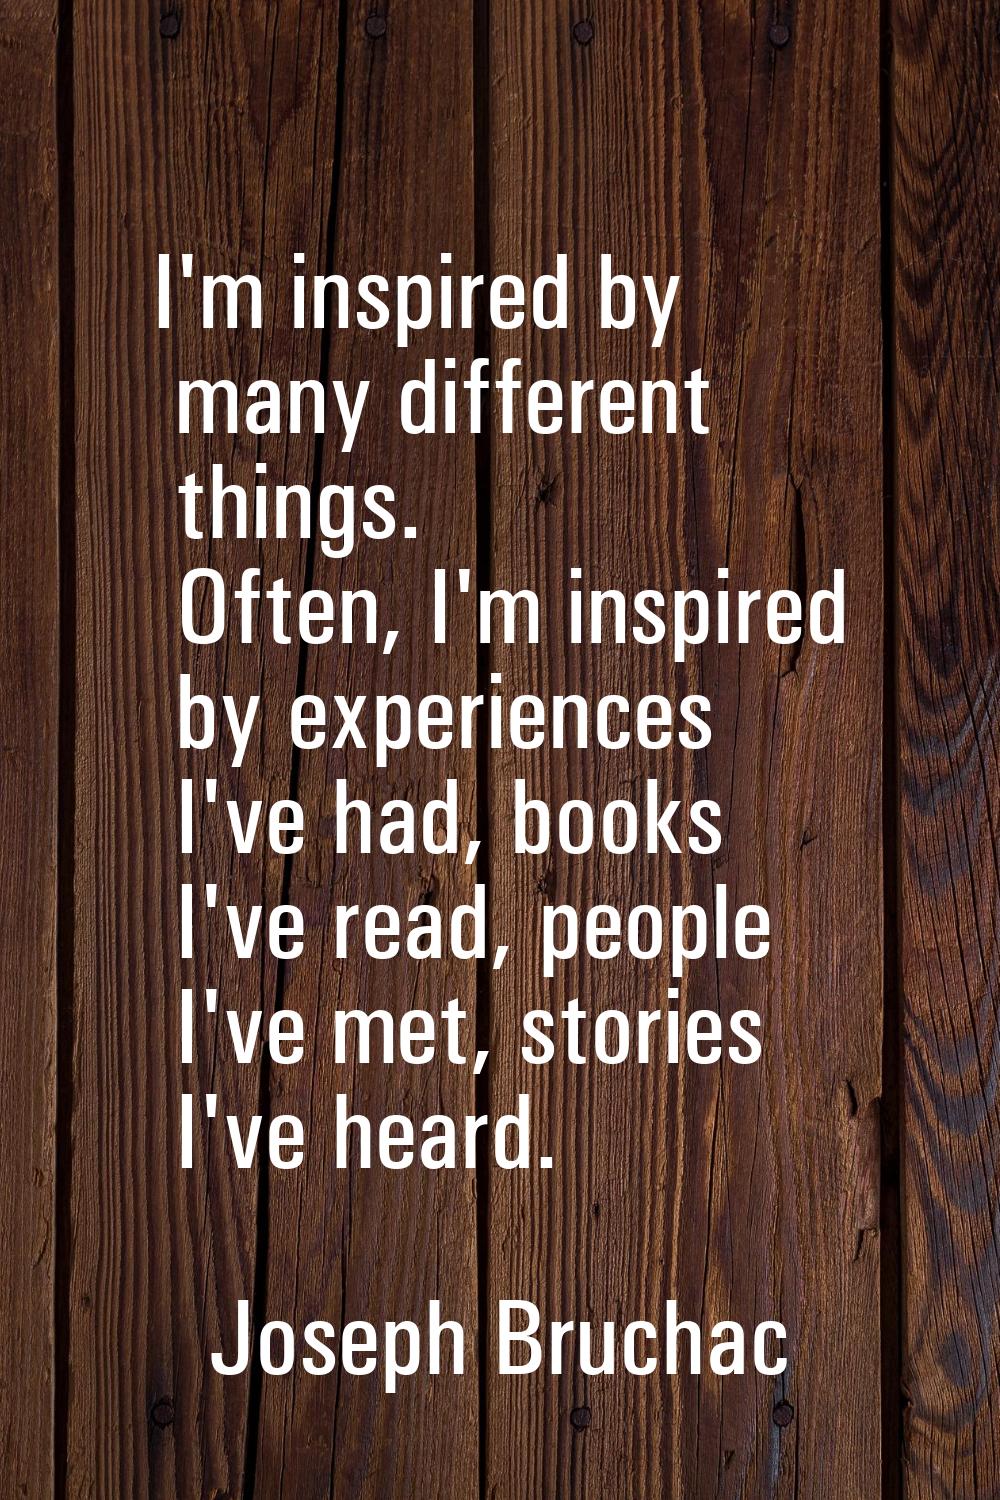 I'm inspired by many different things. Often, I'm inspired by experiences I've had, books I've read